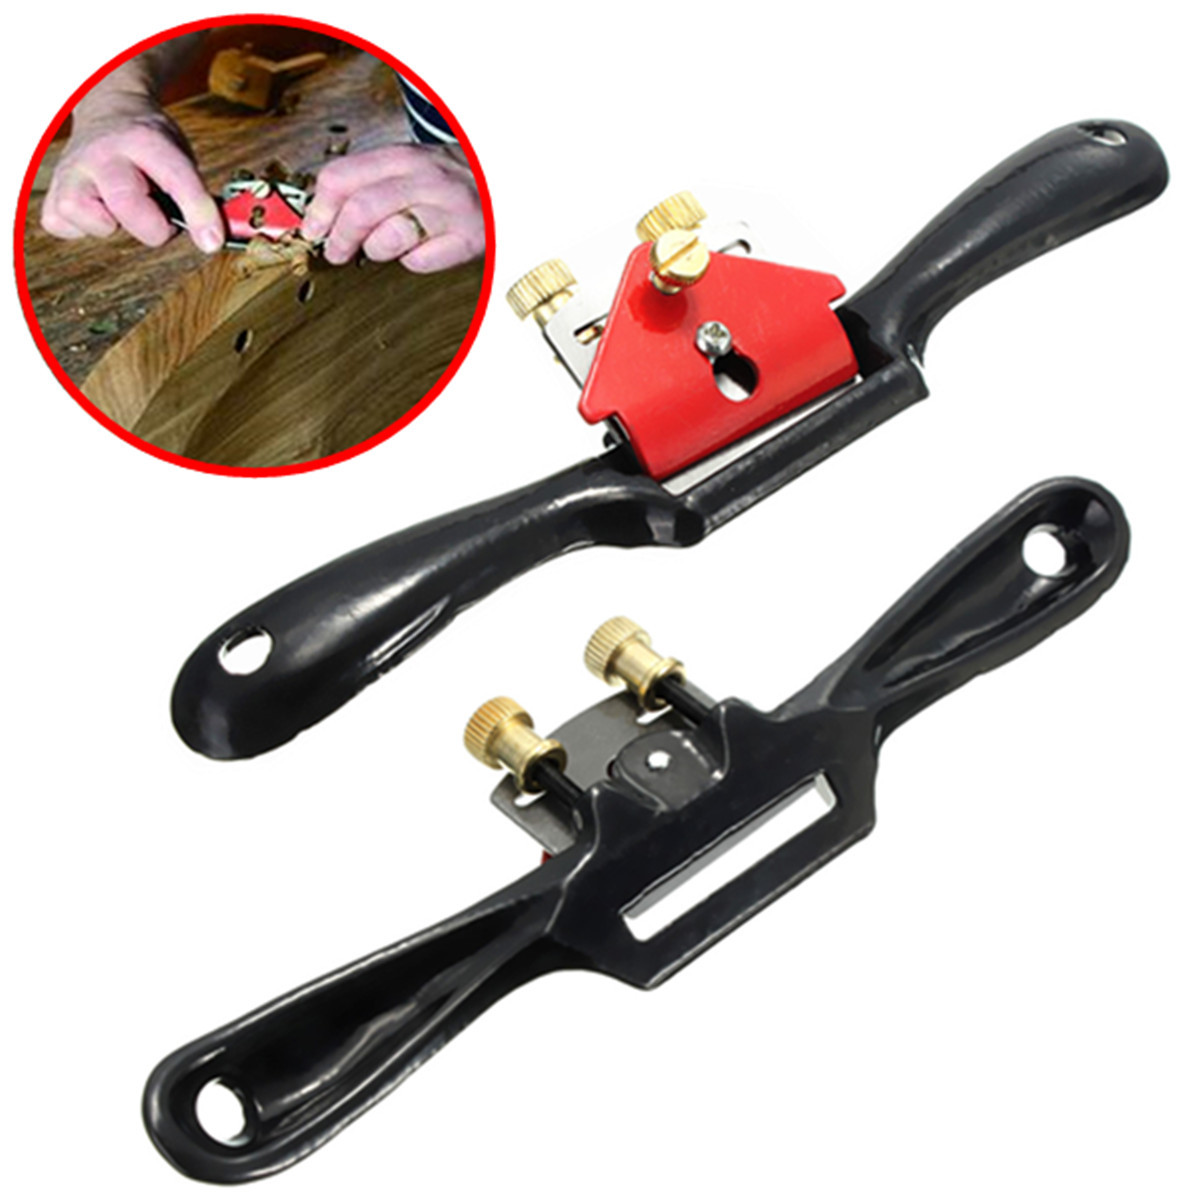 Woodworking Adjustable Spokeshave Woodworking Planer Woodworking Trimming Ttools Adjustable Spokeshave with Flat Base 2pcs